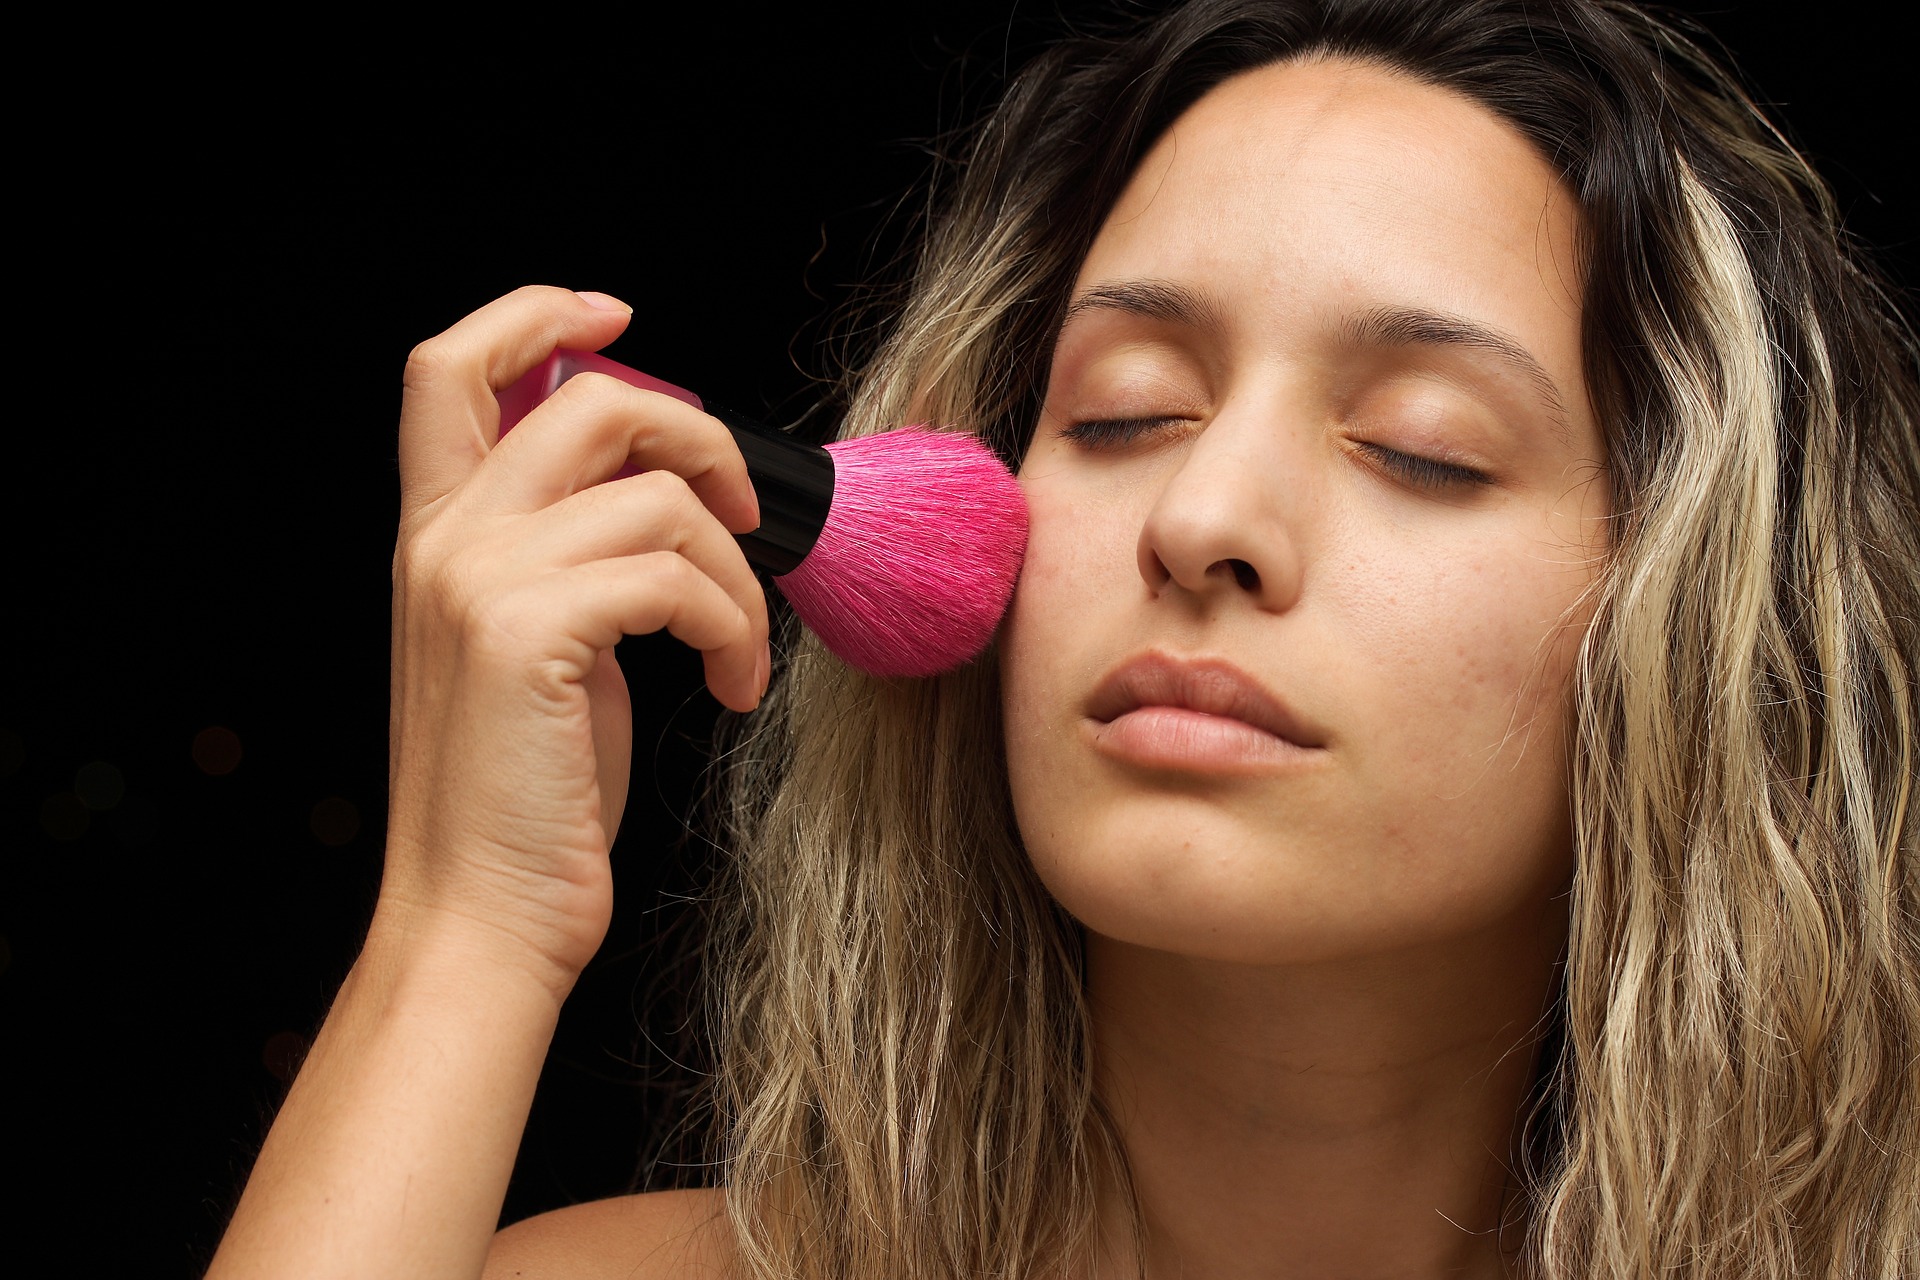 How To Clean Makeup Brushes At Home In 6 Quick Steps